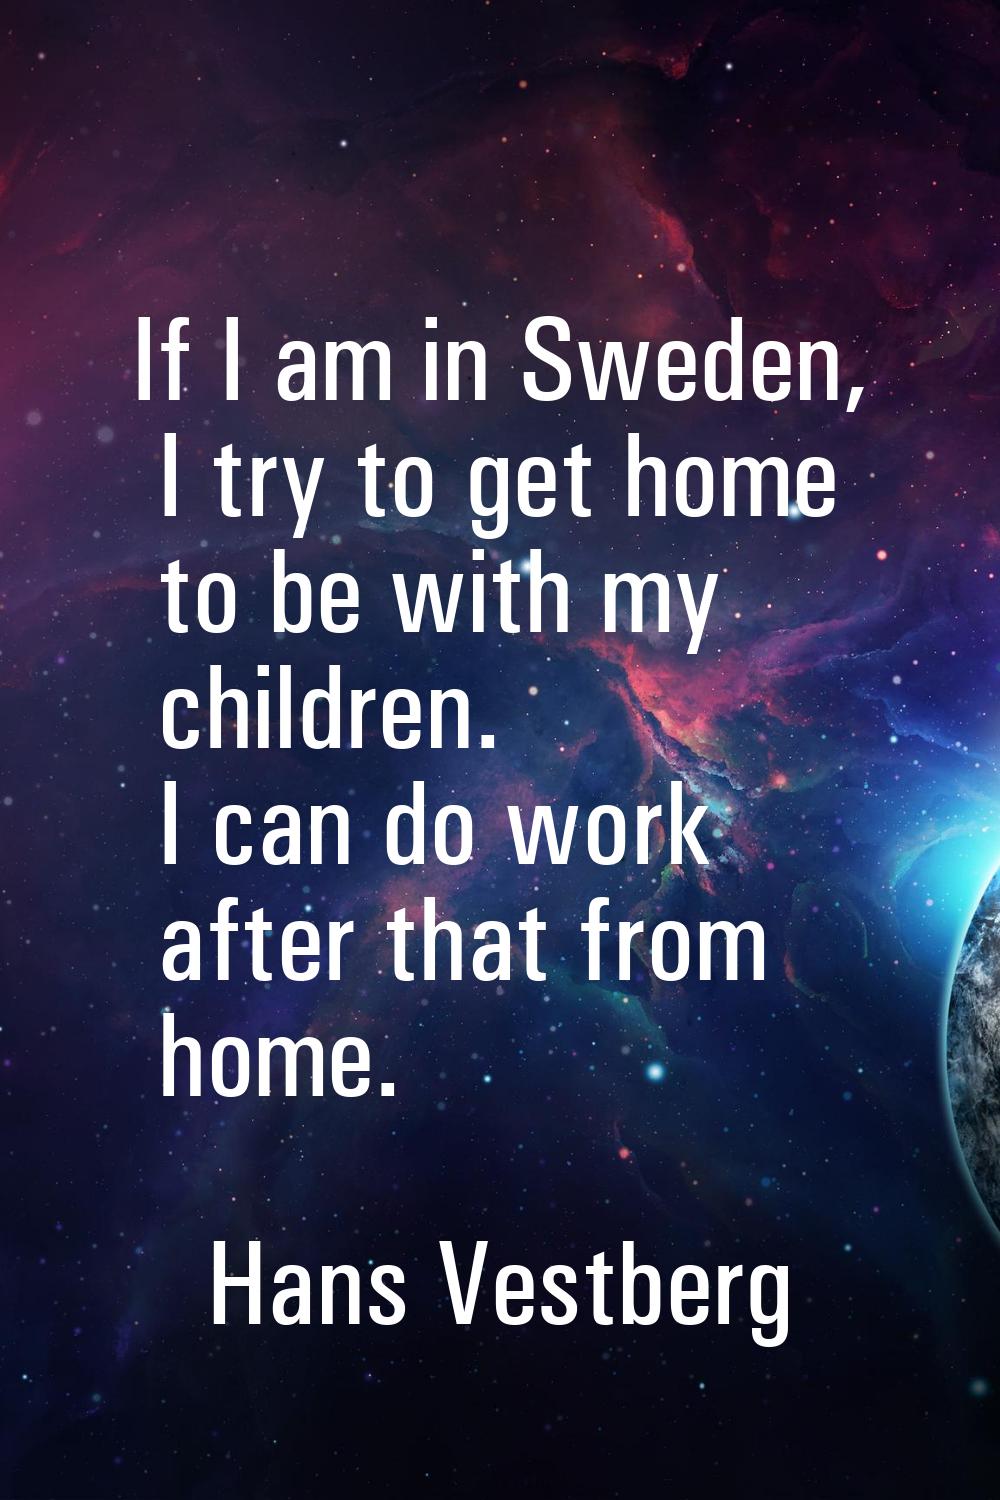 If I am in Sweden, I try to get home to be with my children. I can do work after that from home.